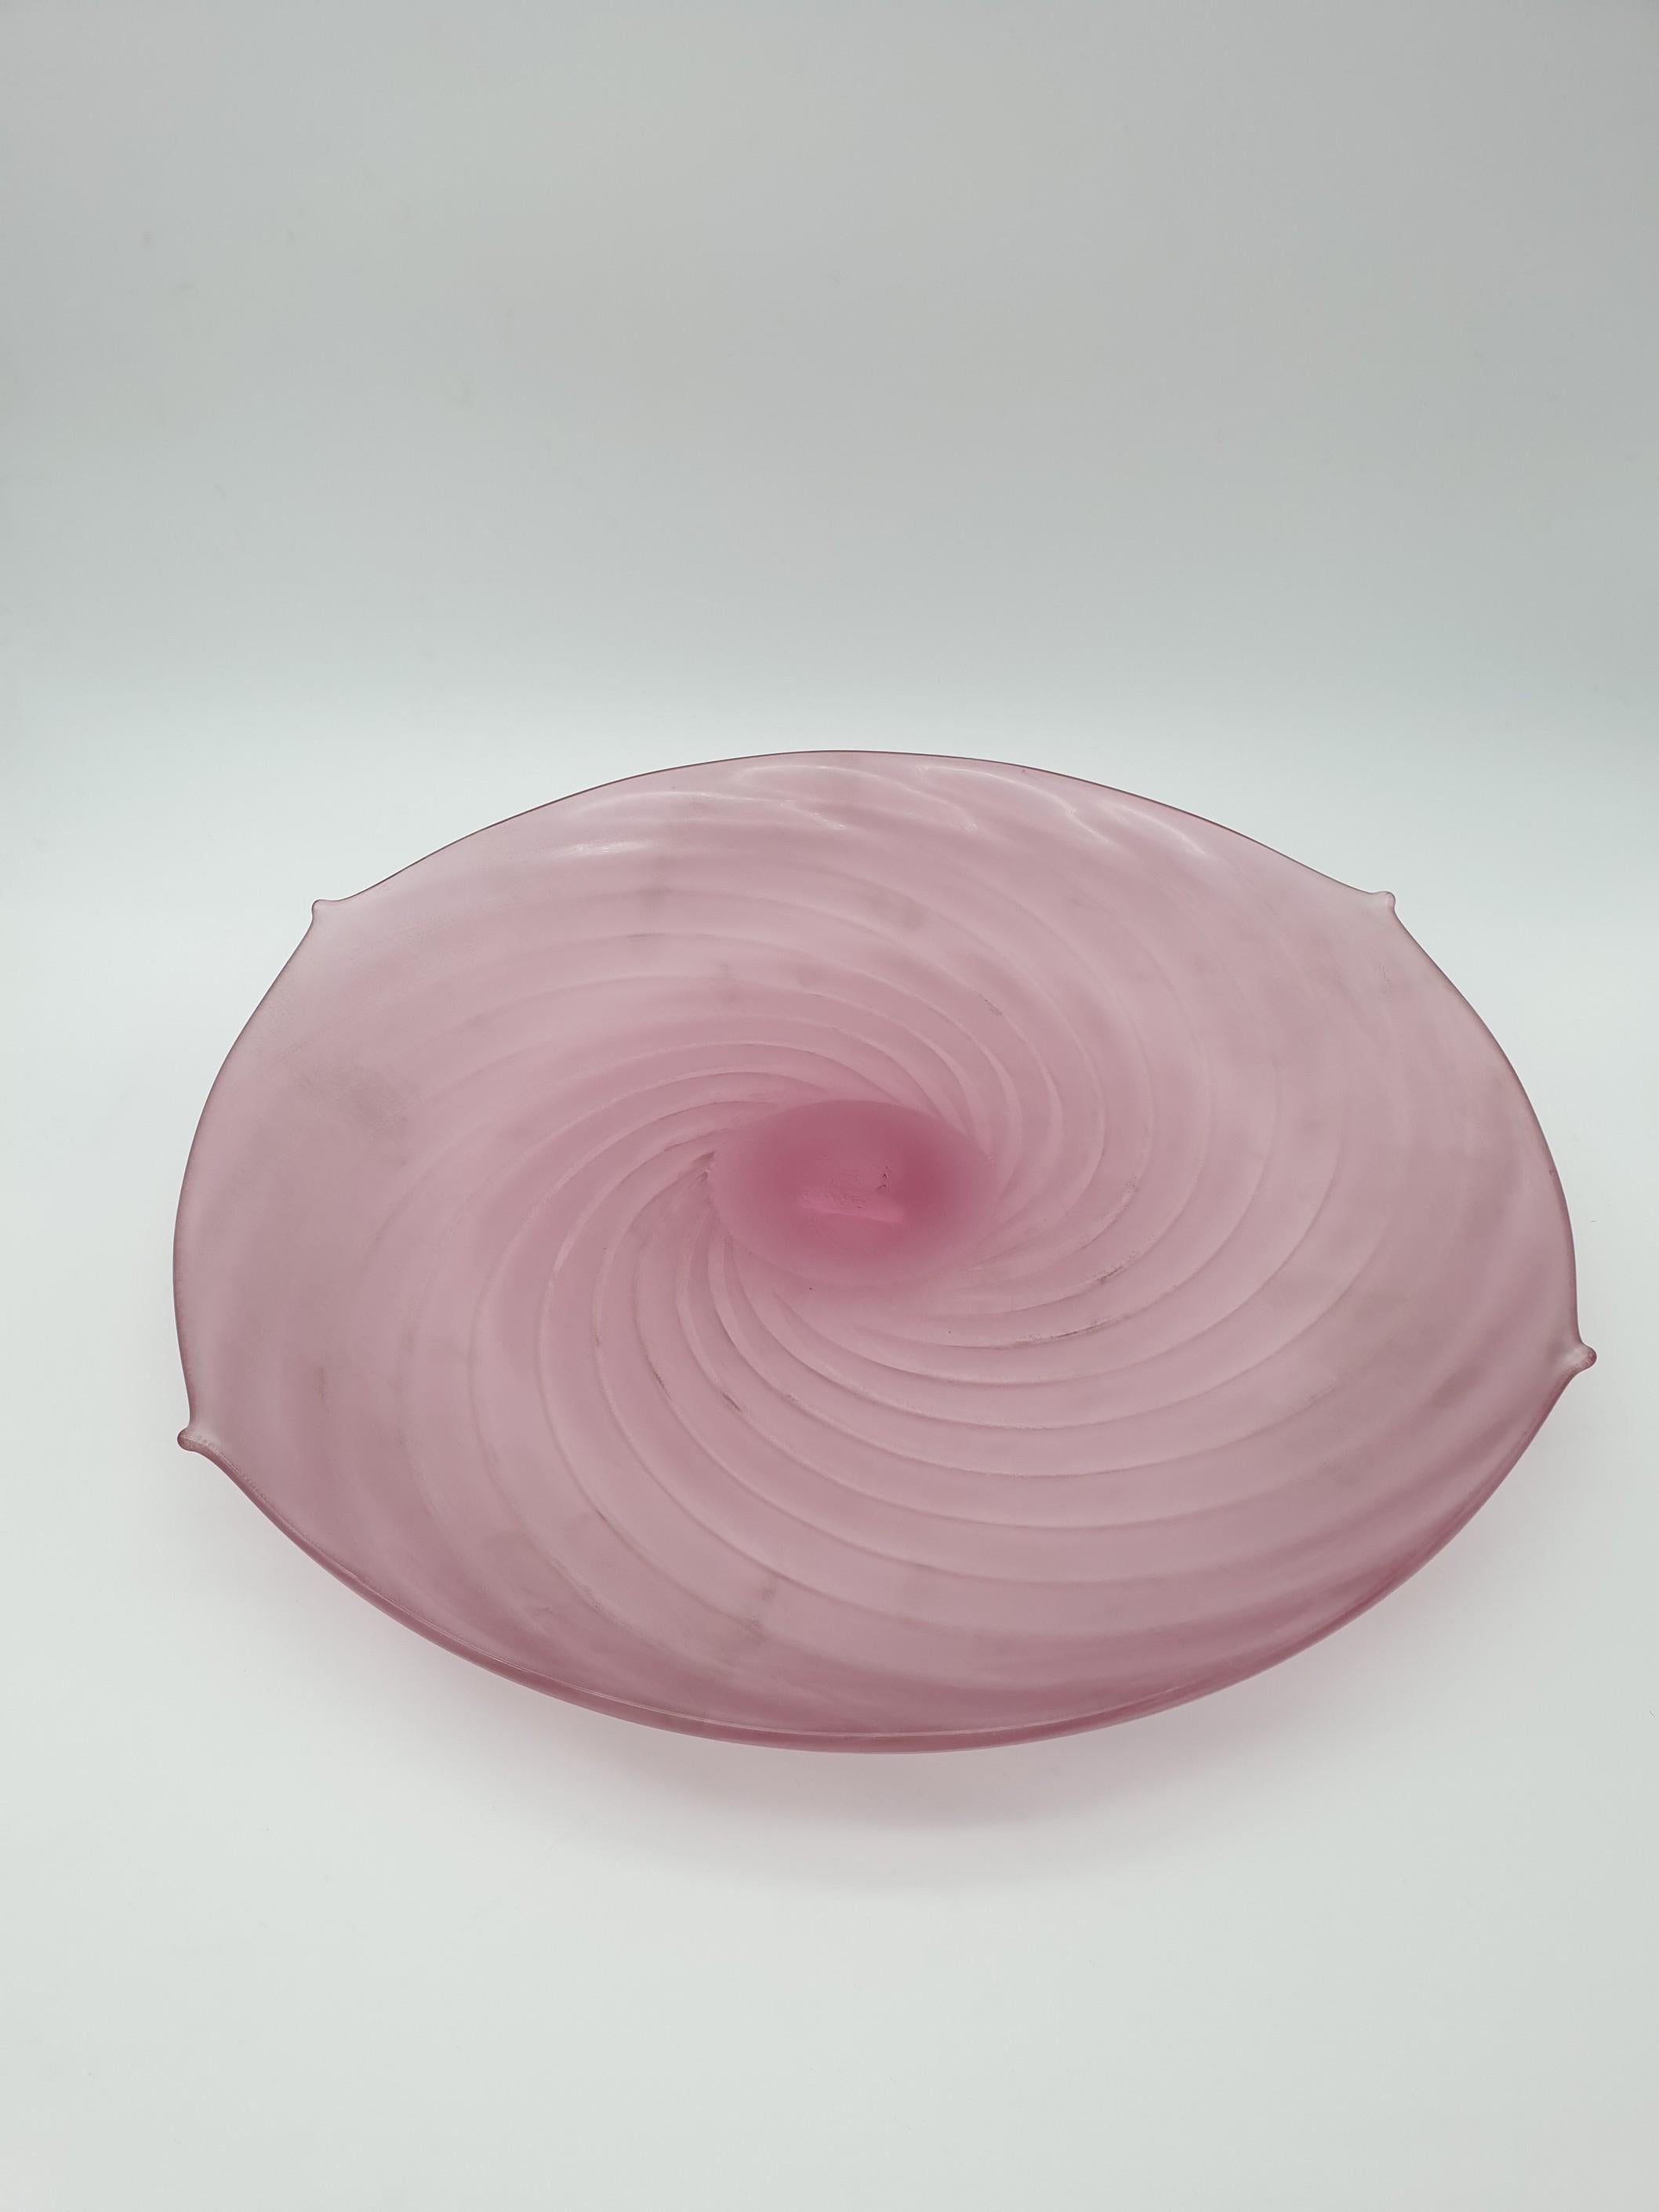 This beautiful modern Murano glass centerpiece (dish) has been completely handmade by Gino Cenedese e Figlio glass factory in the late 1980s. This stunning piece features a delicate ruby pink color and ridged pattern, with four characteristic